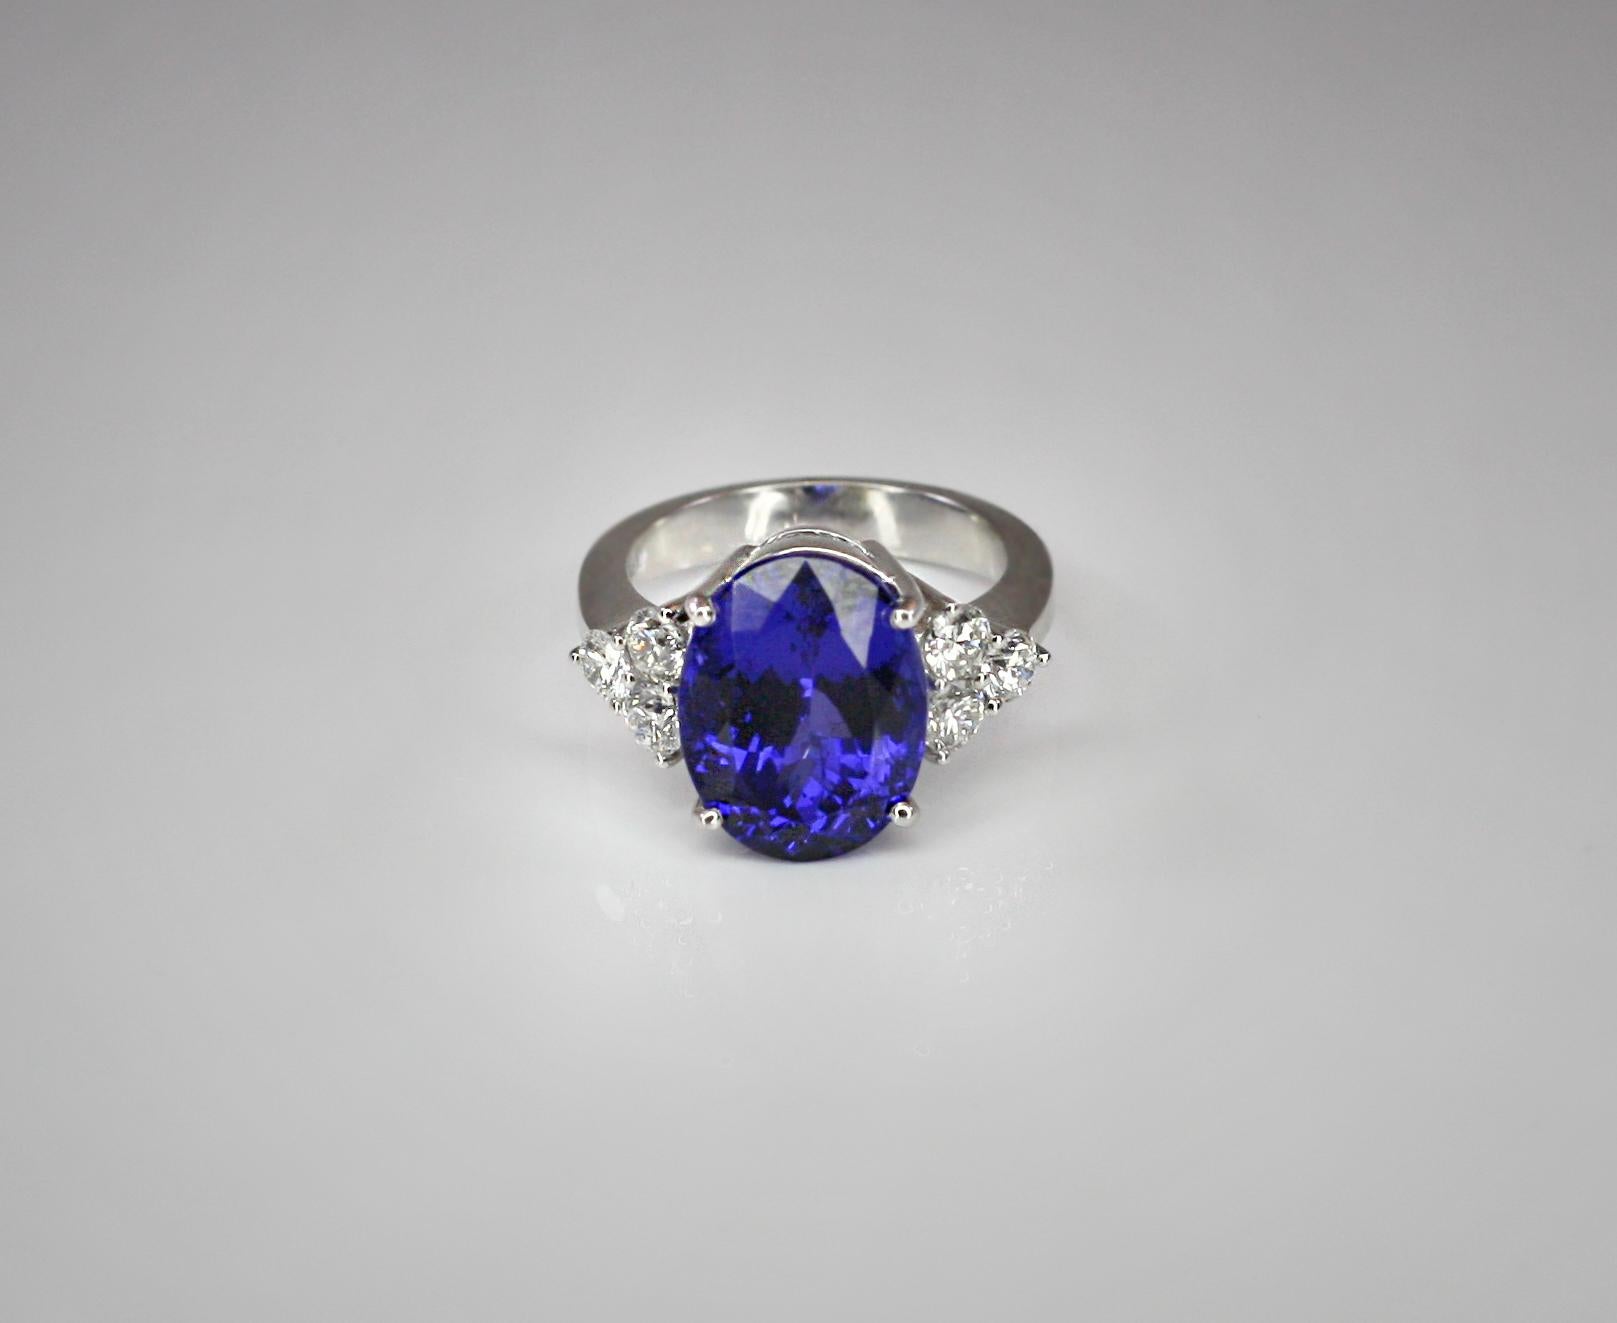 This S.Georgios designer Ring is all hand-made in 18 Karat White Gold and features a stunning color solitaire oval cut natural Tanzanite total weight 9.43 Carat surrounded by 6 natural brilliant cut VVS1 clarity and color F Diamonds total weight of